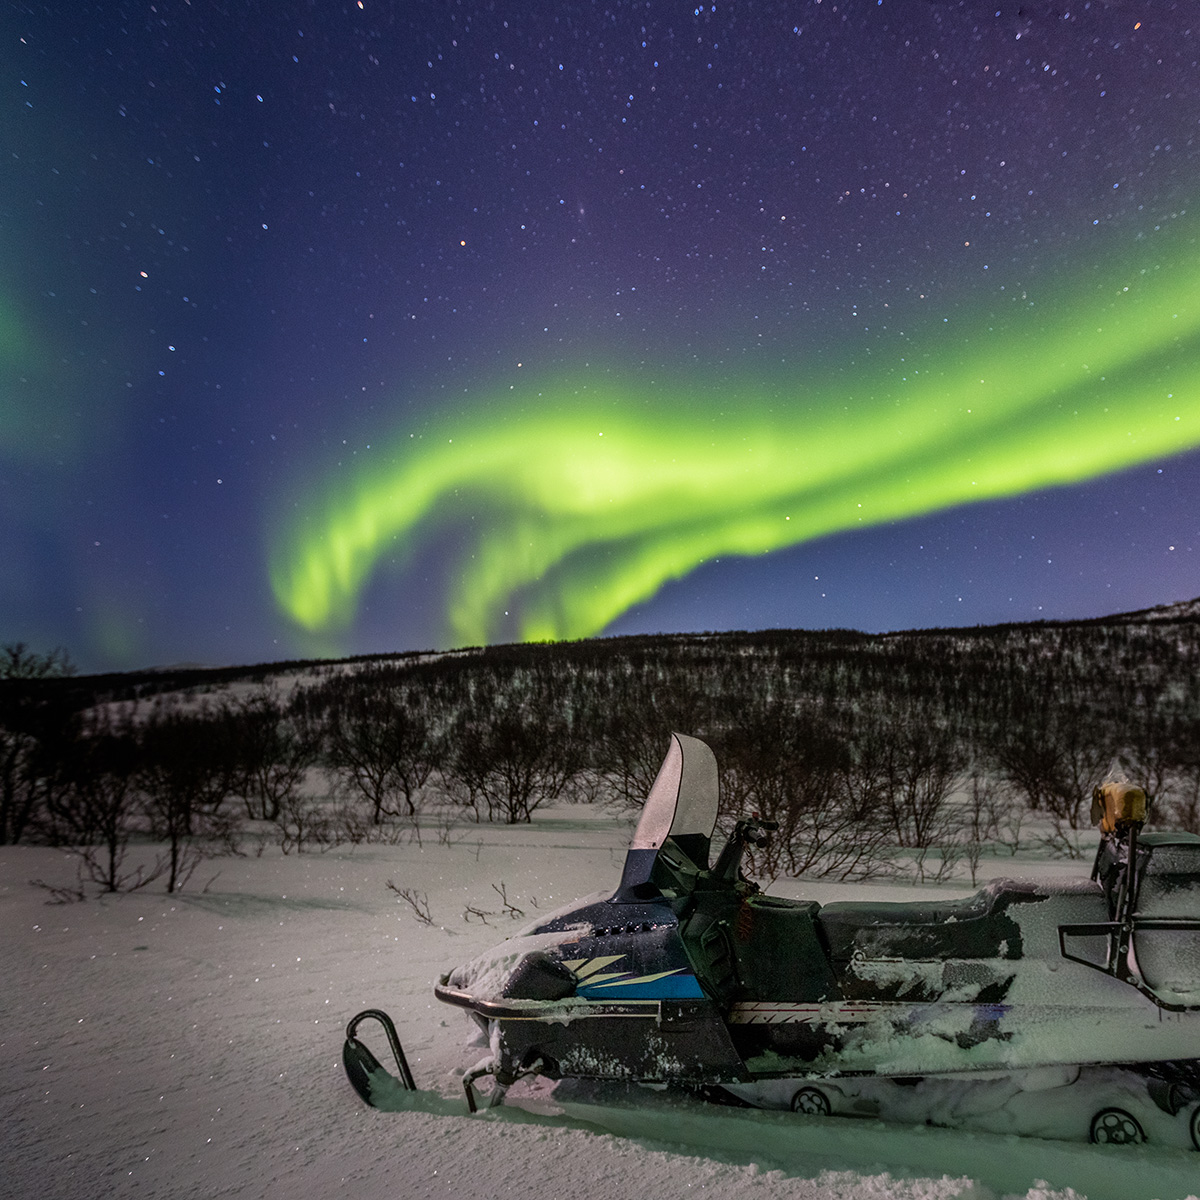 Green northern lights and snowmobile on foreground